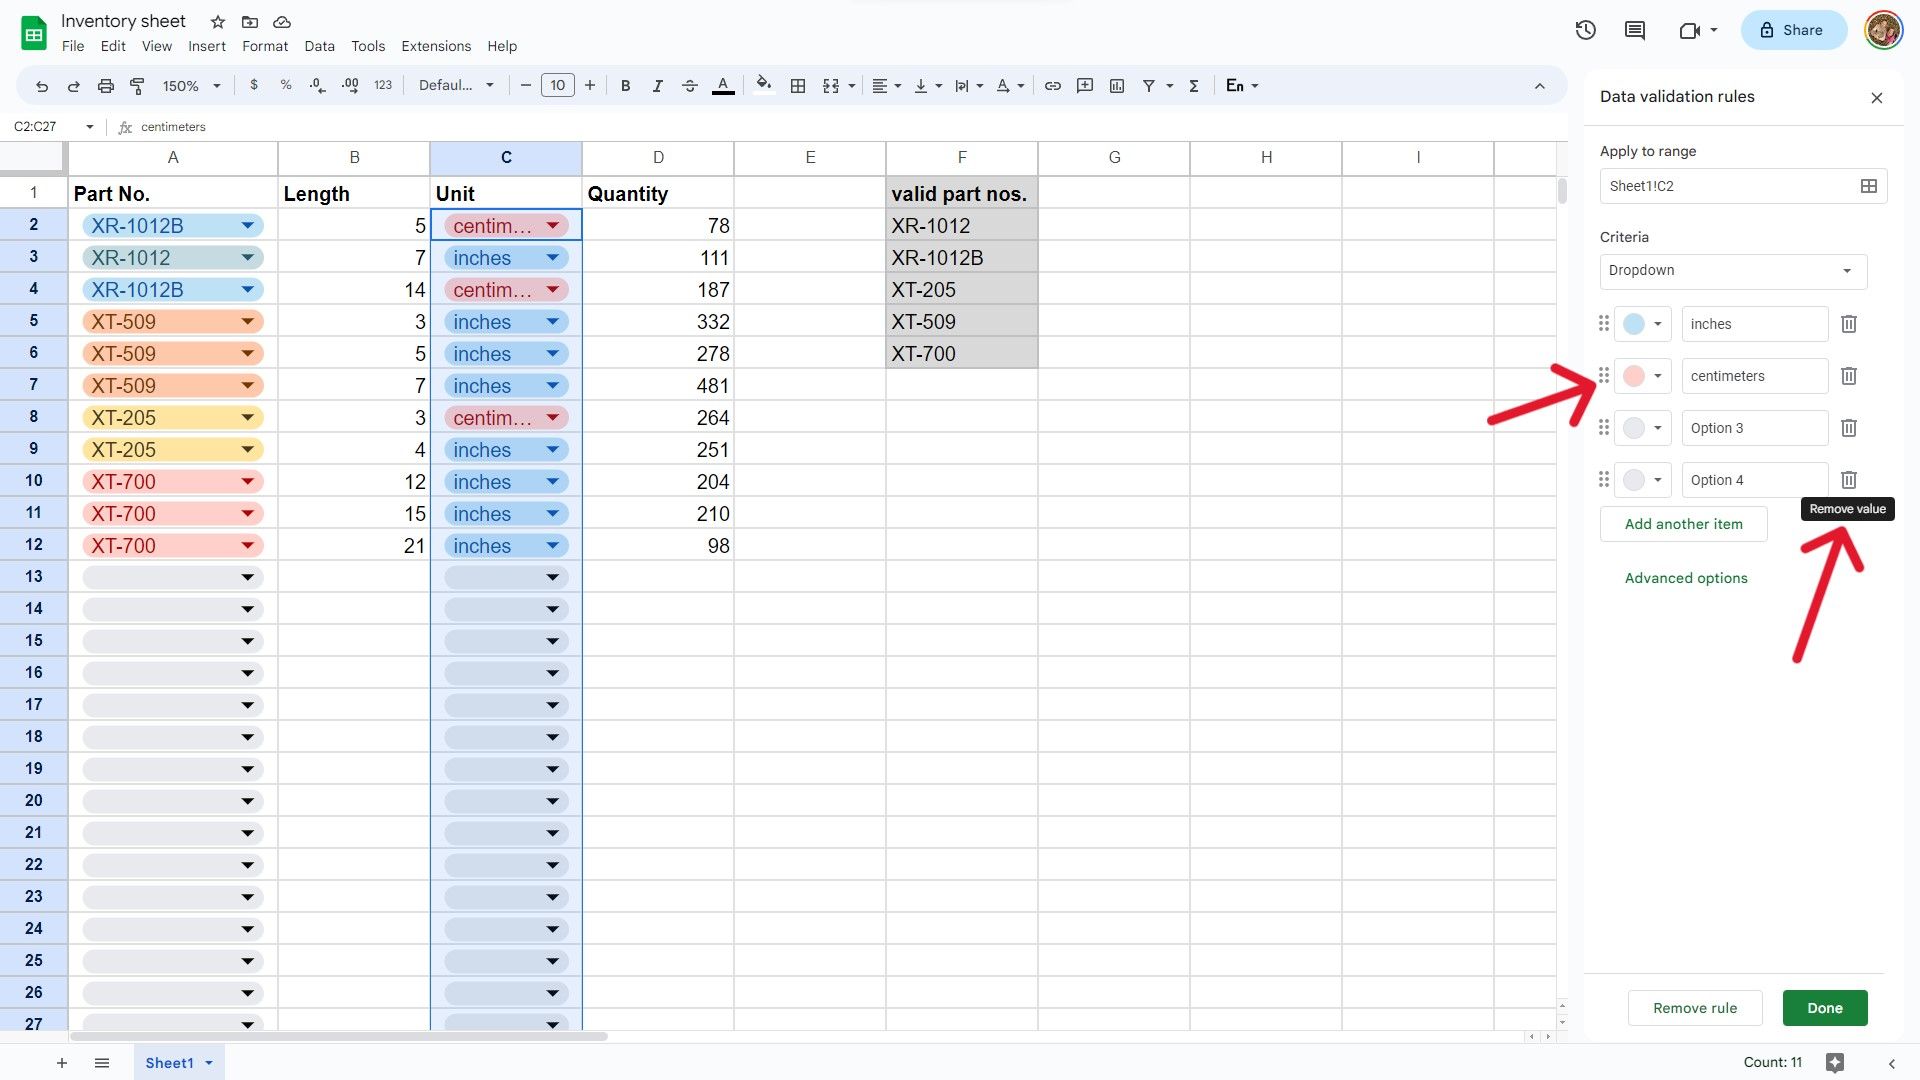 A screenshot of a Google Sheets document showing dropdown options rearrange and delete controls.